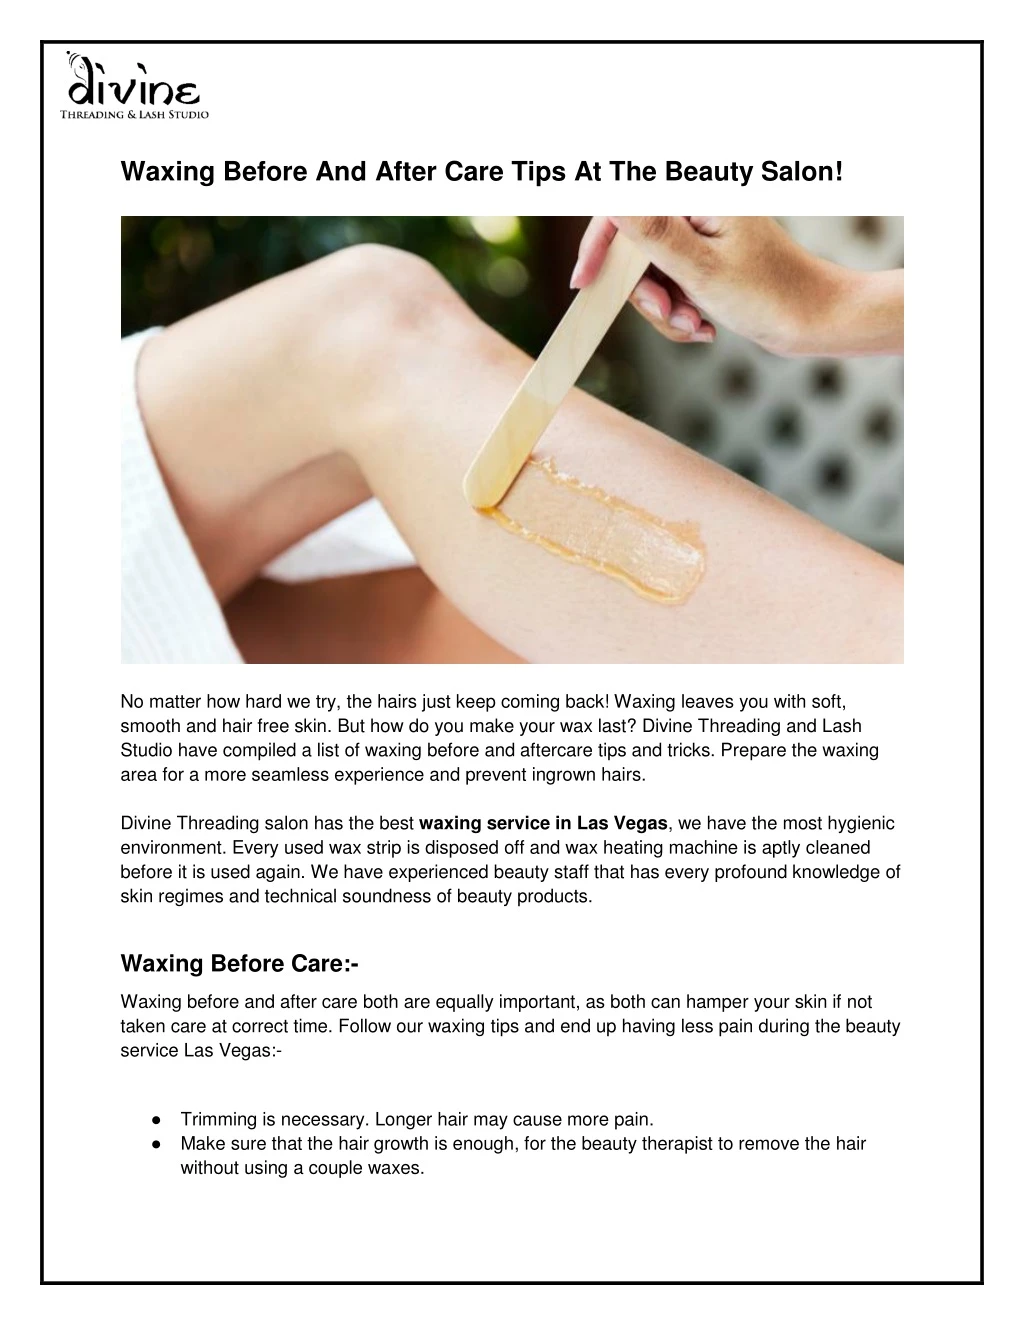 waxing before and after care tips at the beauty